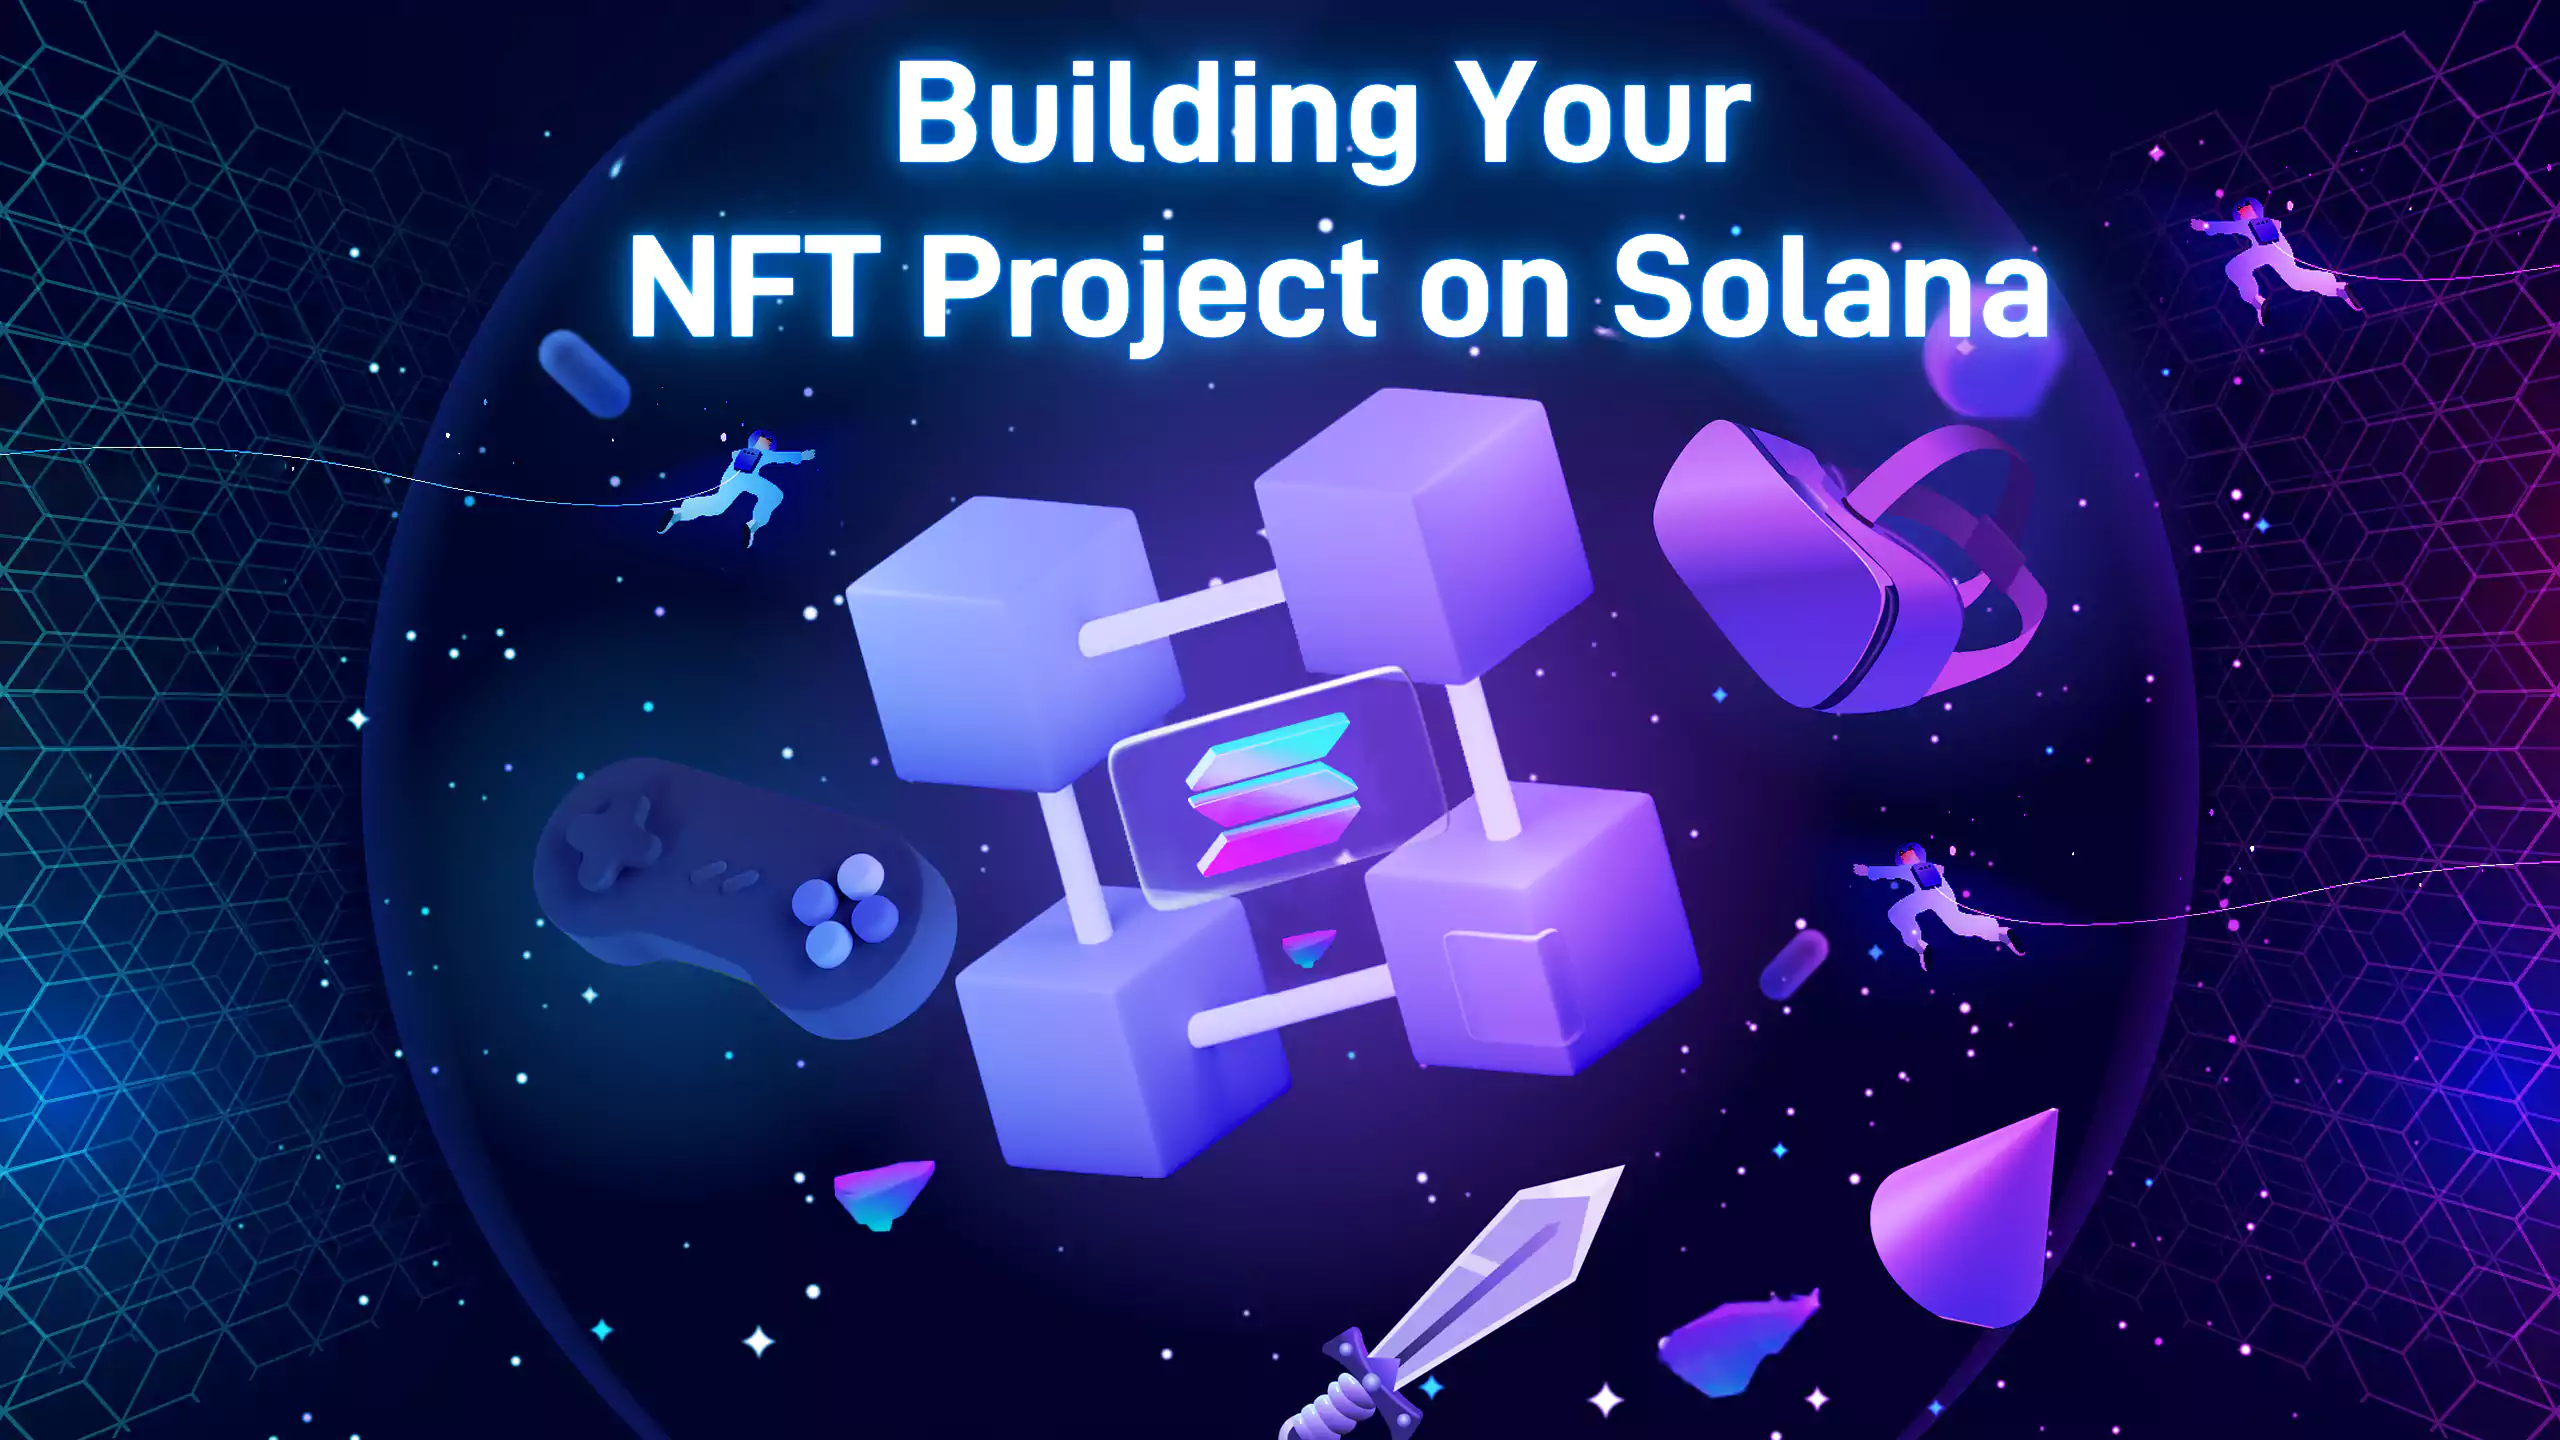 Building Your NFT Project on Solana